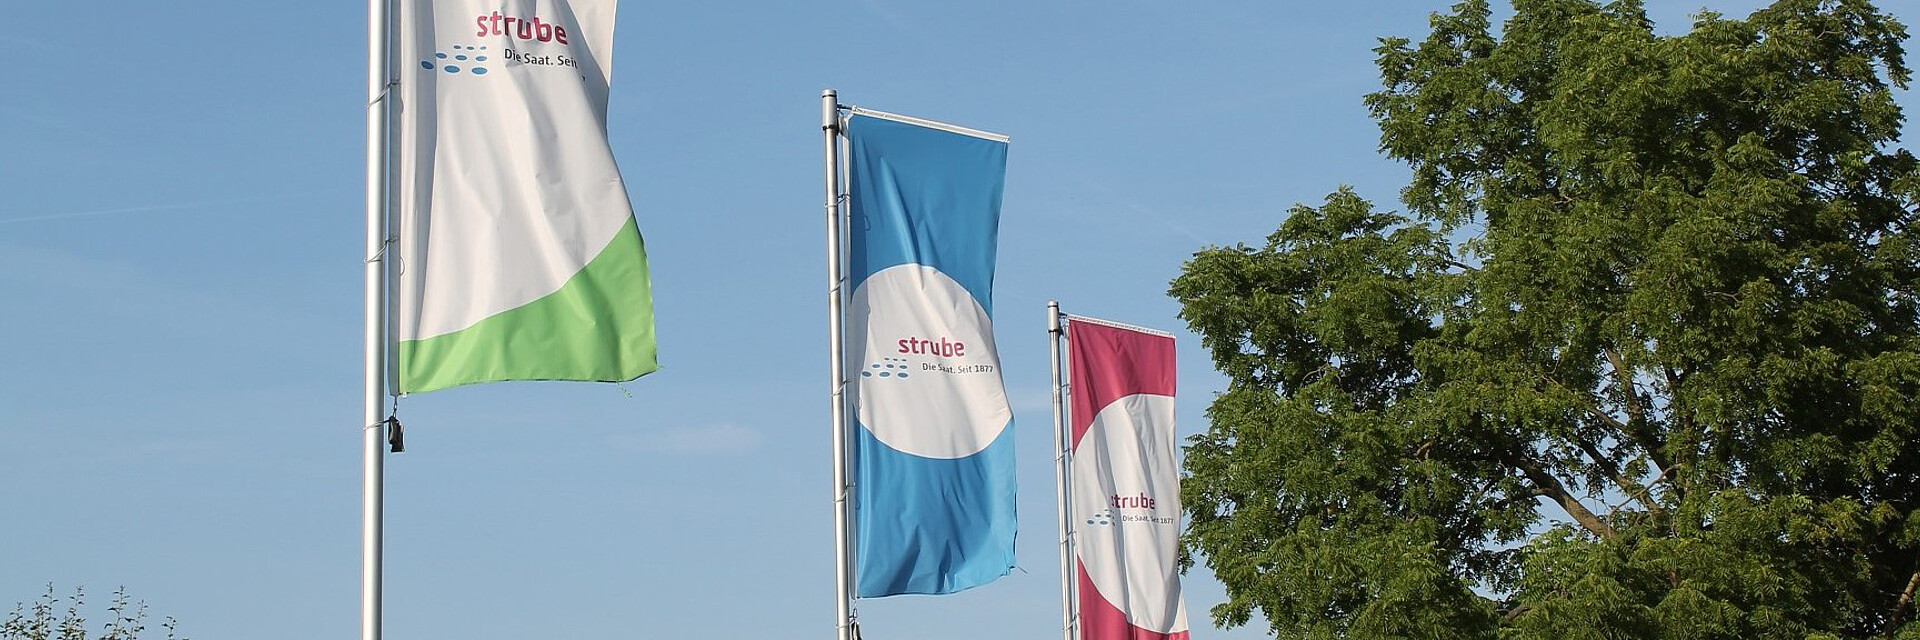 Flags with Strube logo